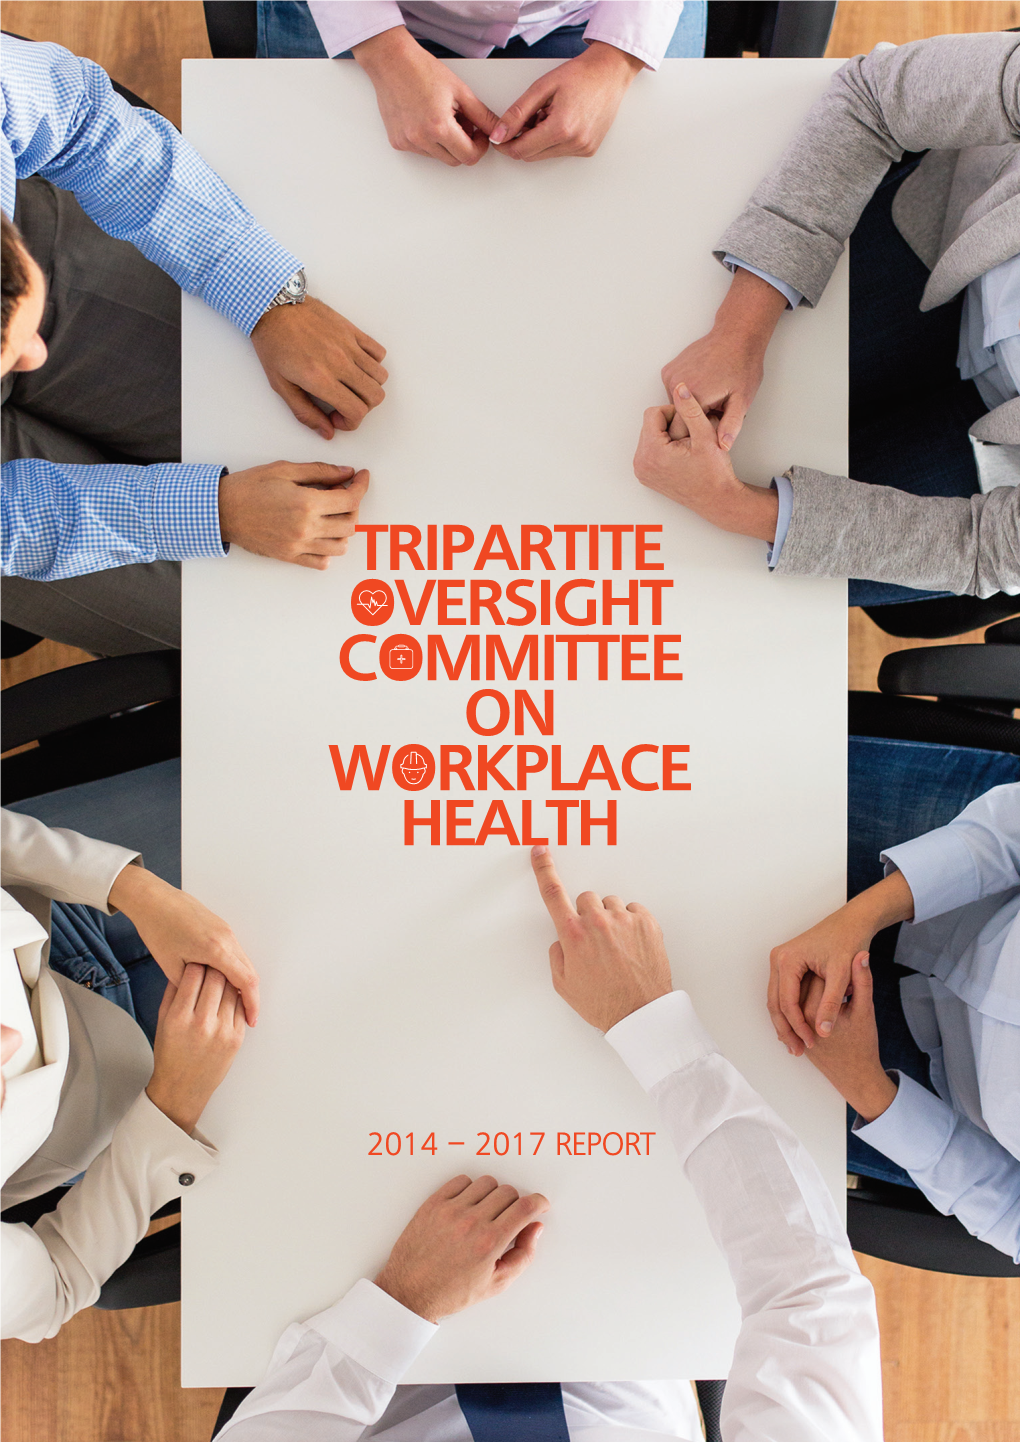 Tripartite Oversight Committee on Workplace Health